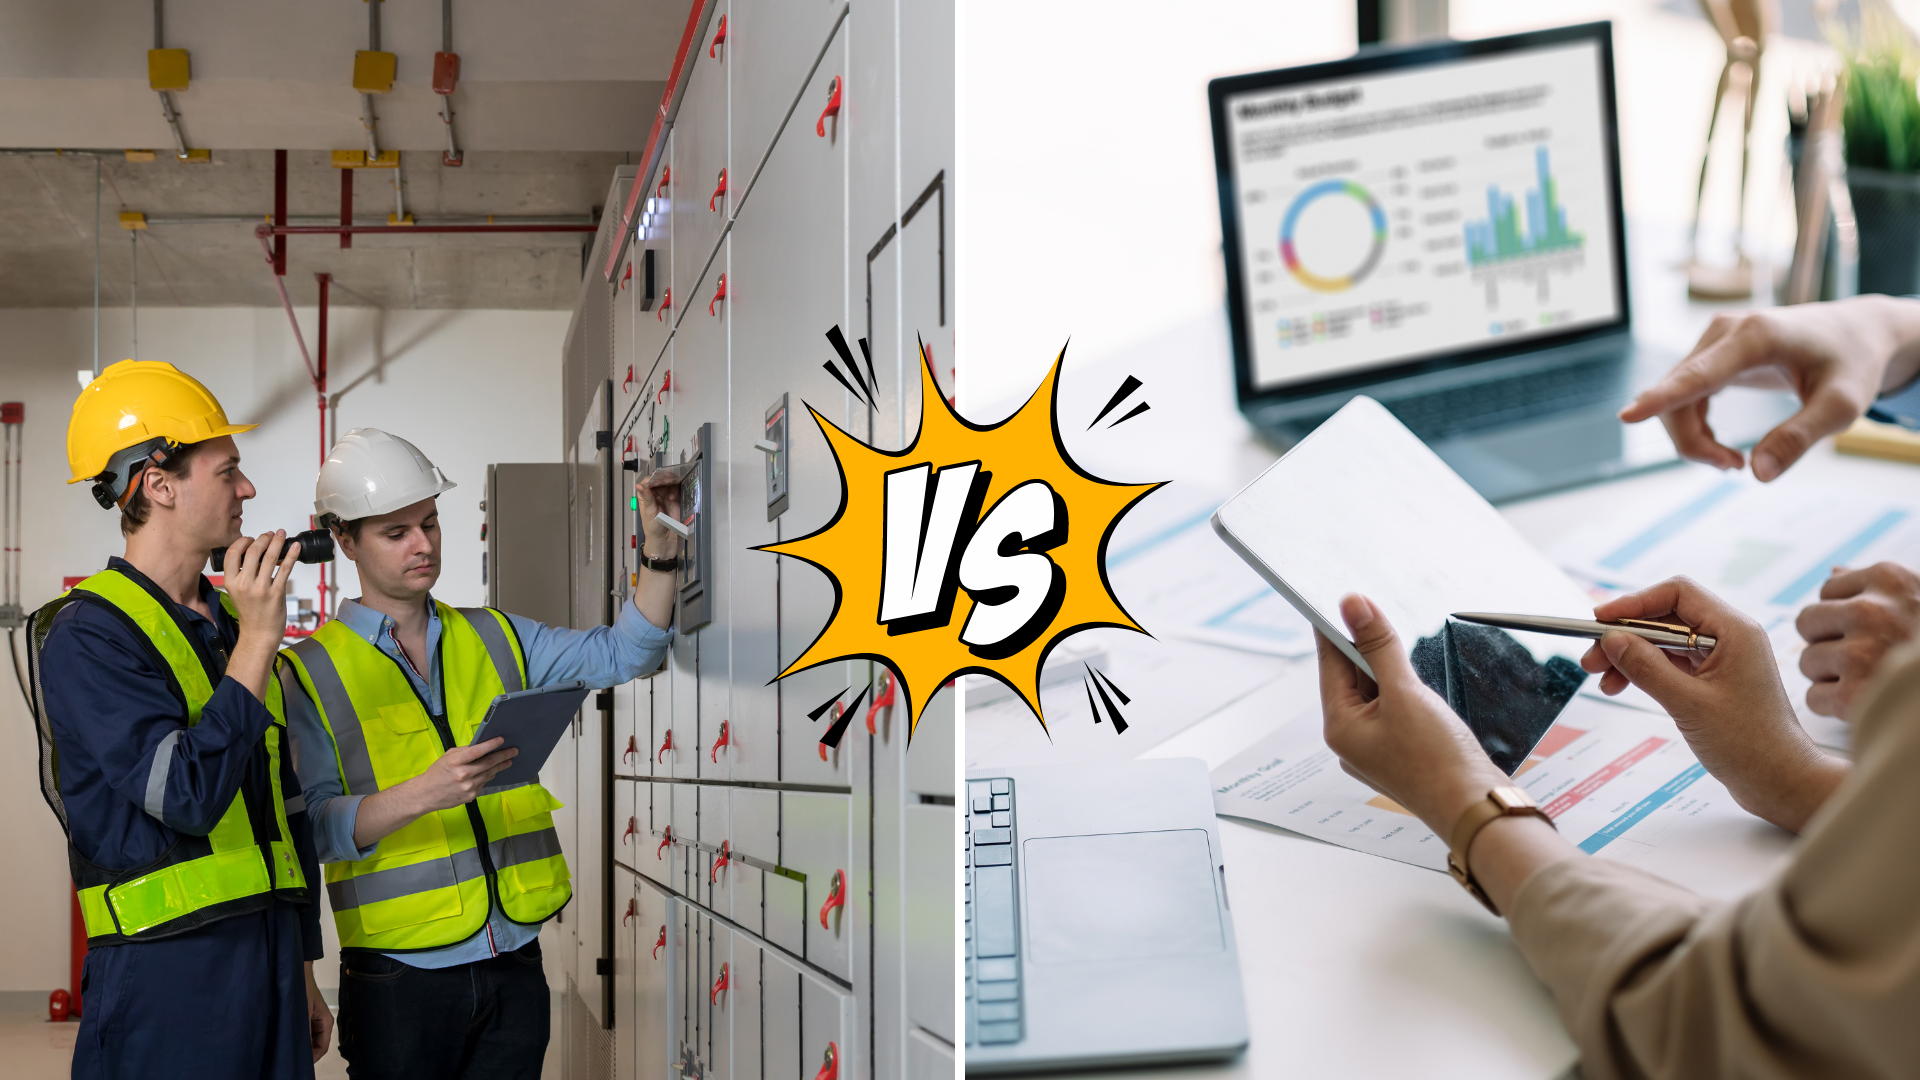 Microsoft Field Service and Microsoft Project Operations. Two similar solutions, or are they?